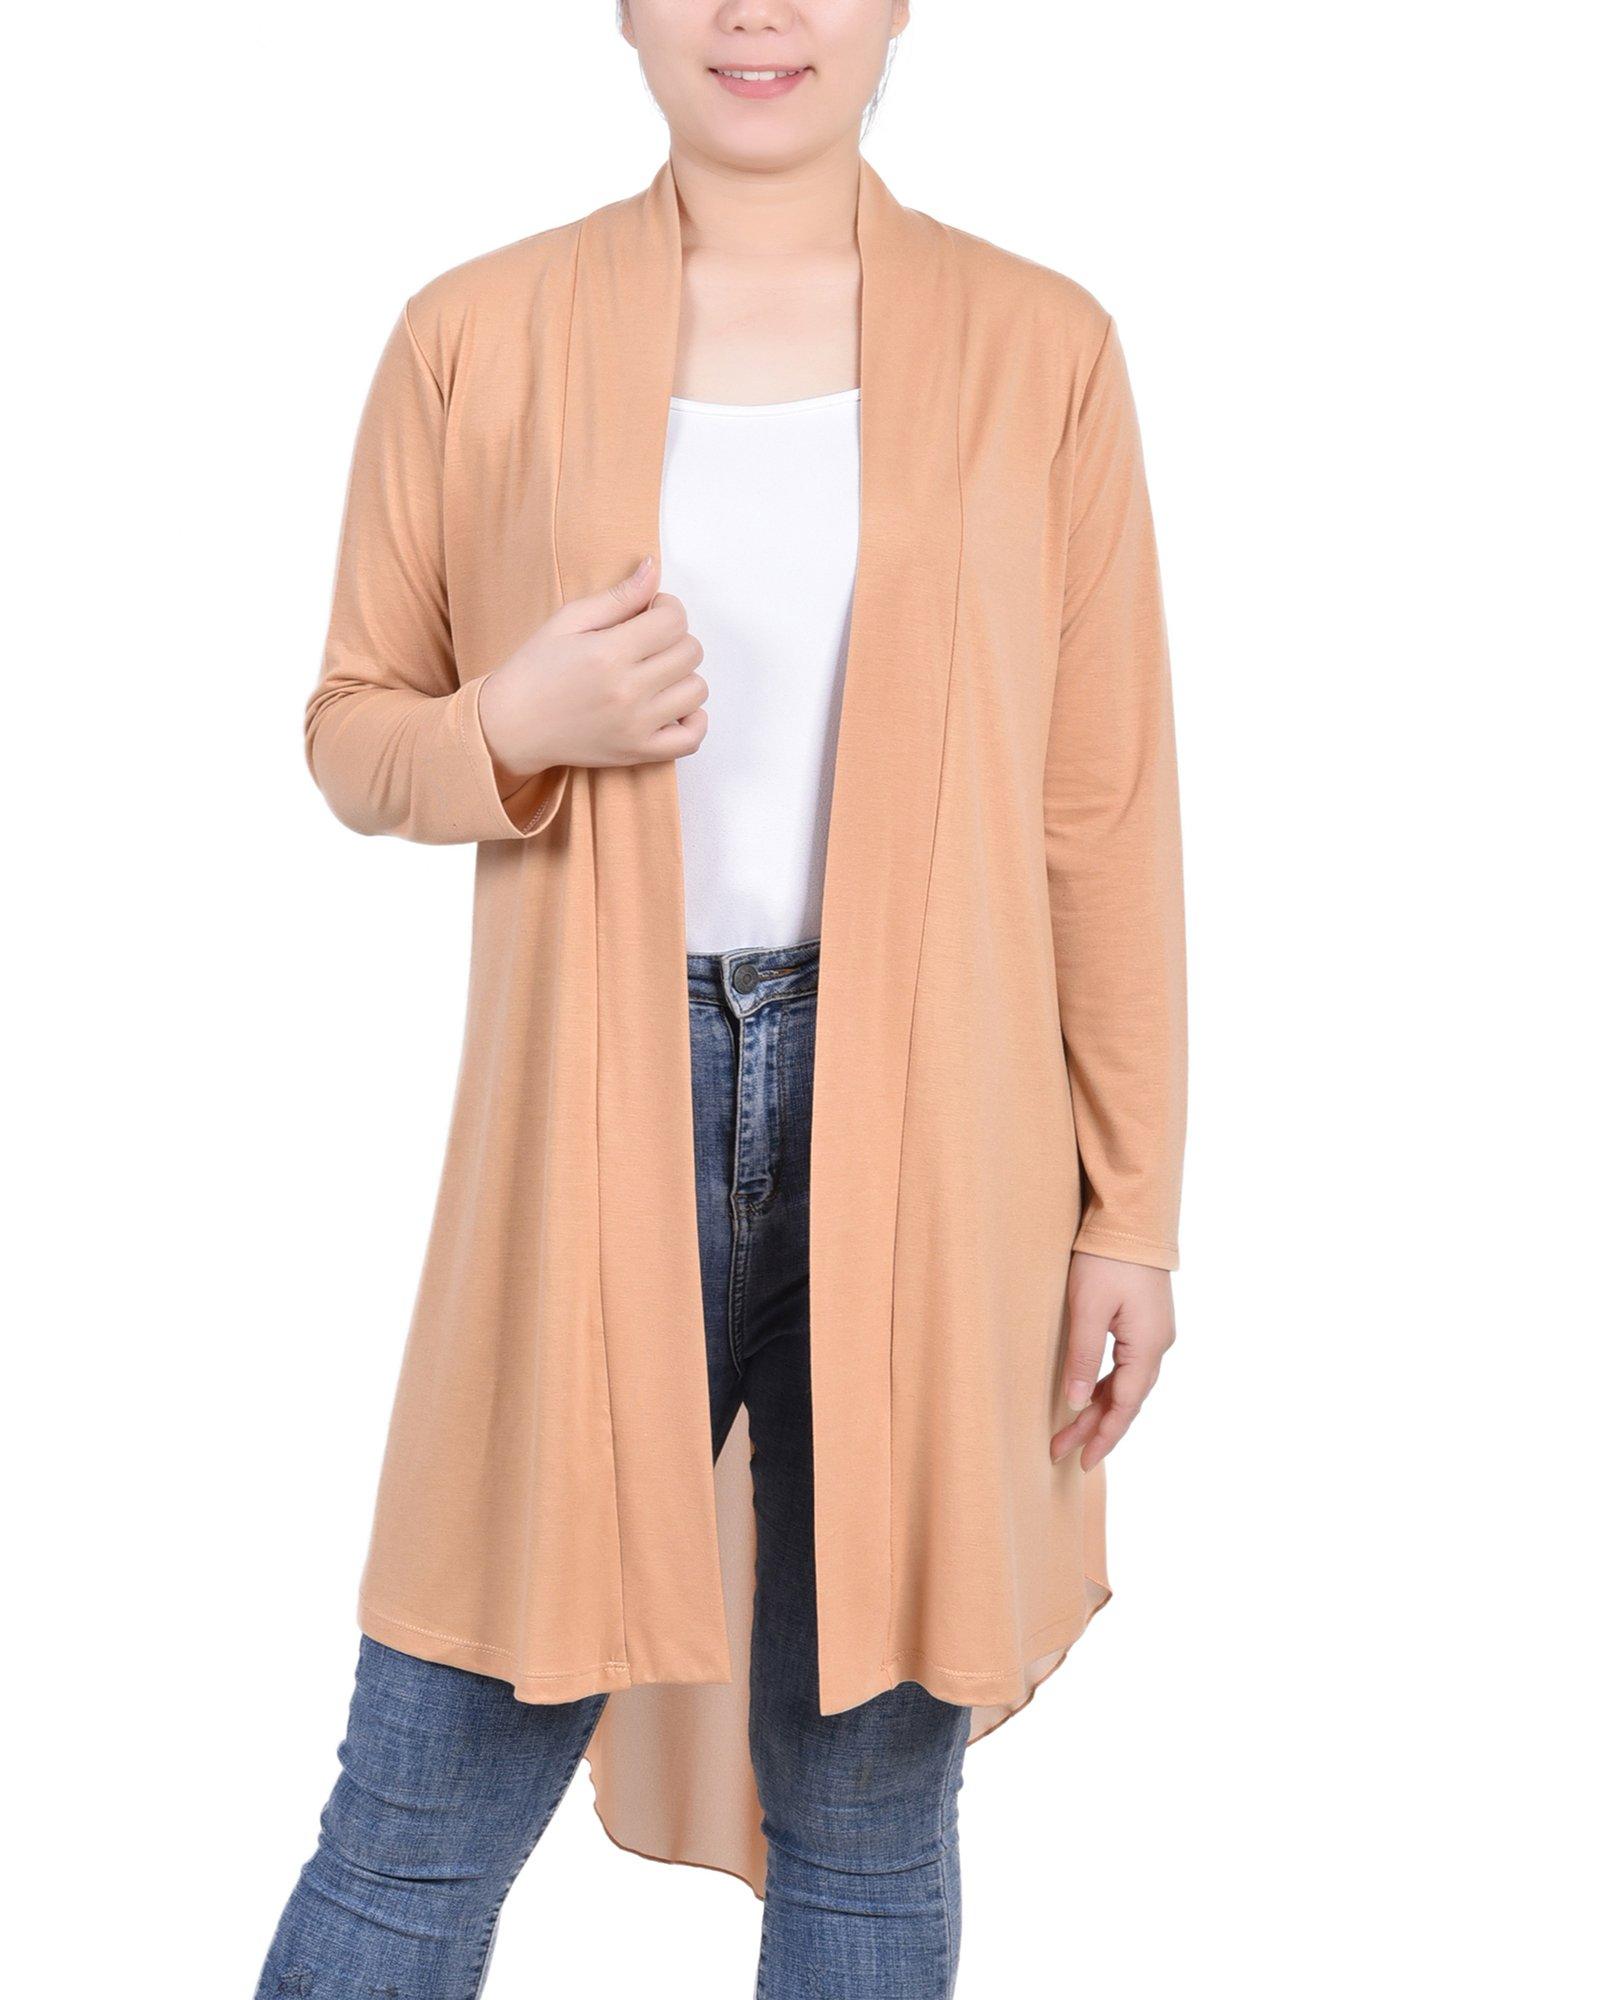 NY Collection Womens Long Sleeve Knit Cardigan